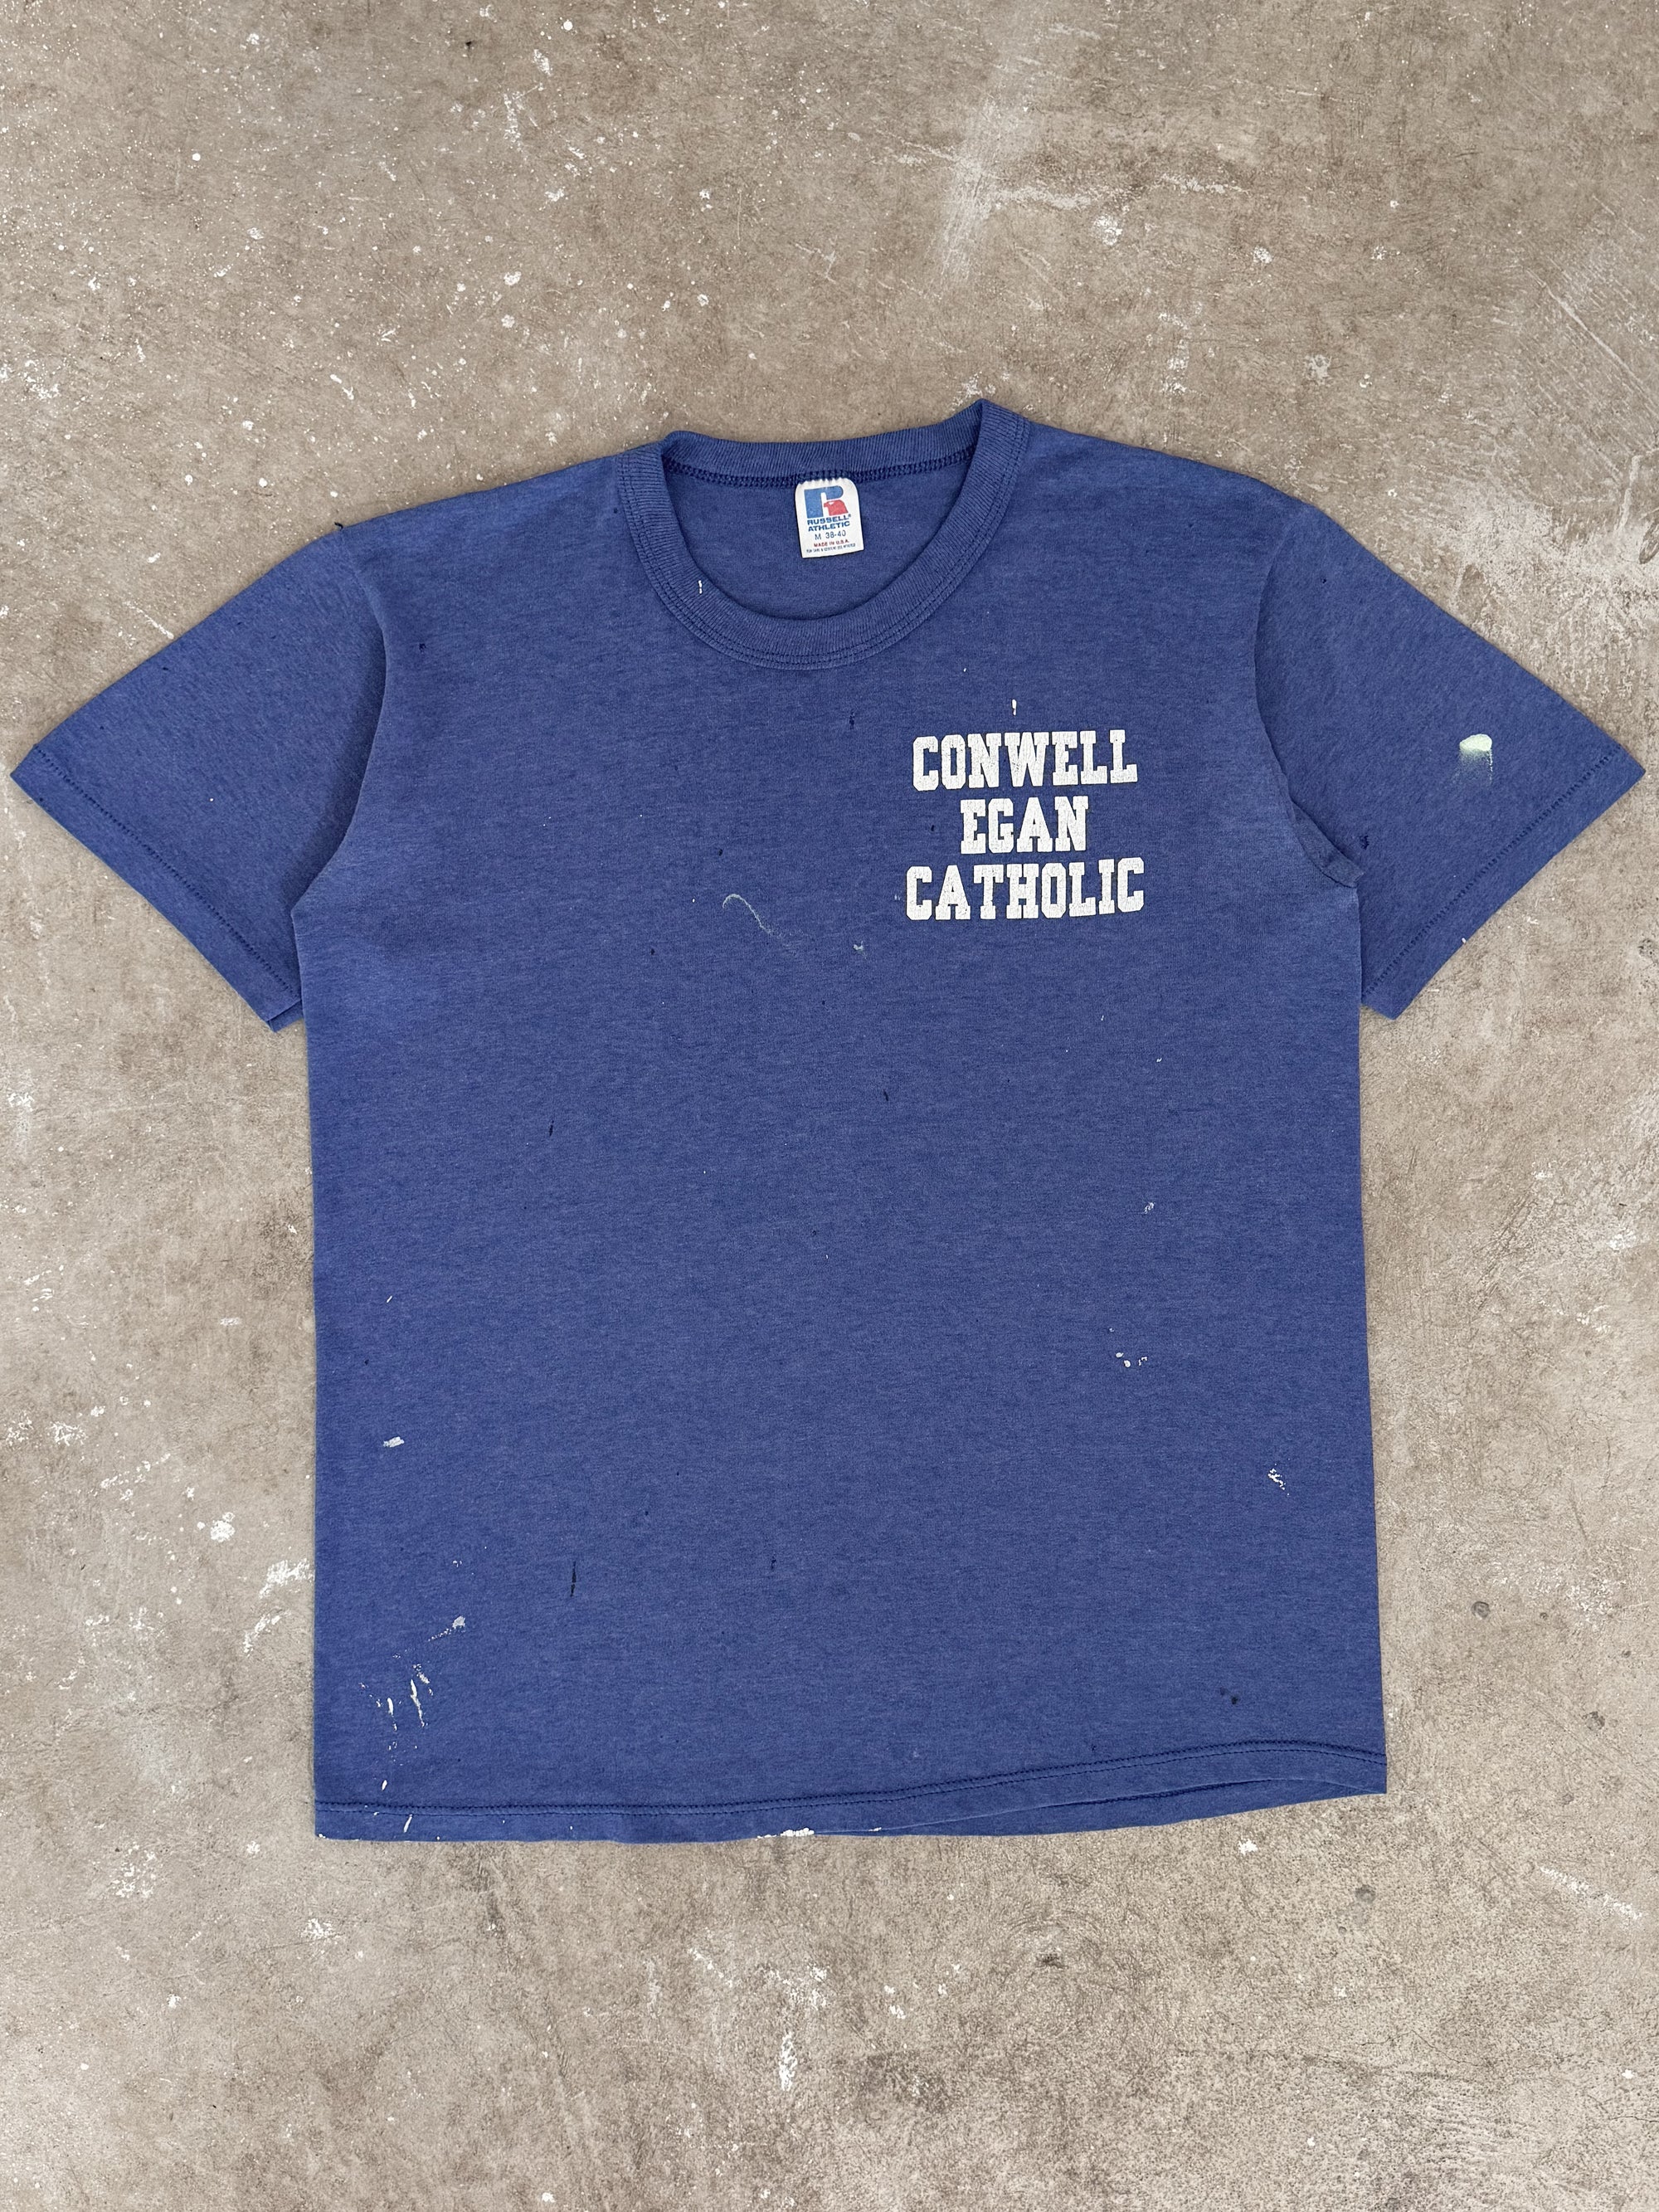 1980s Russell "Conwell Egan" Tee (S/M)